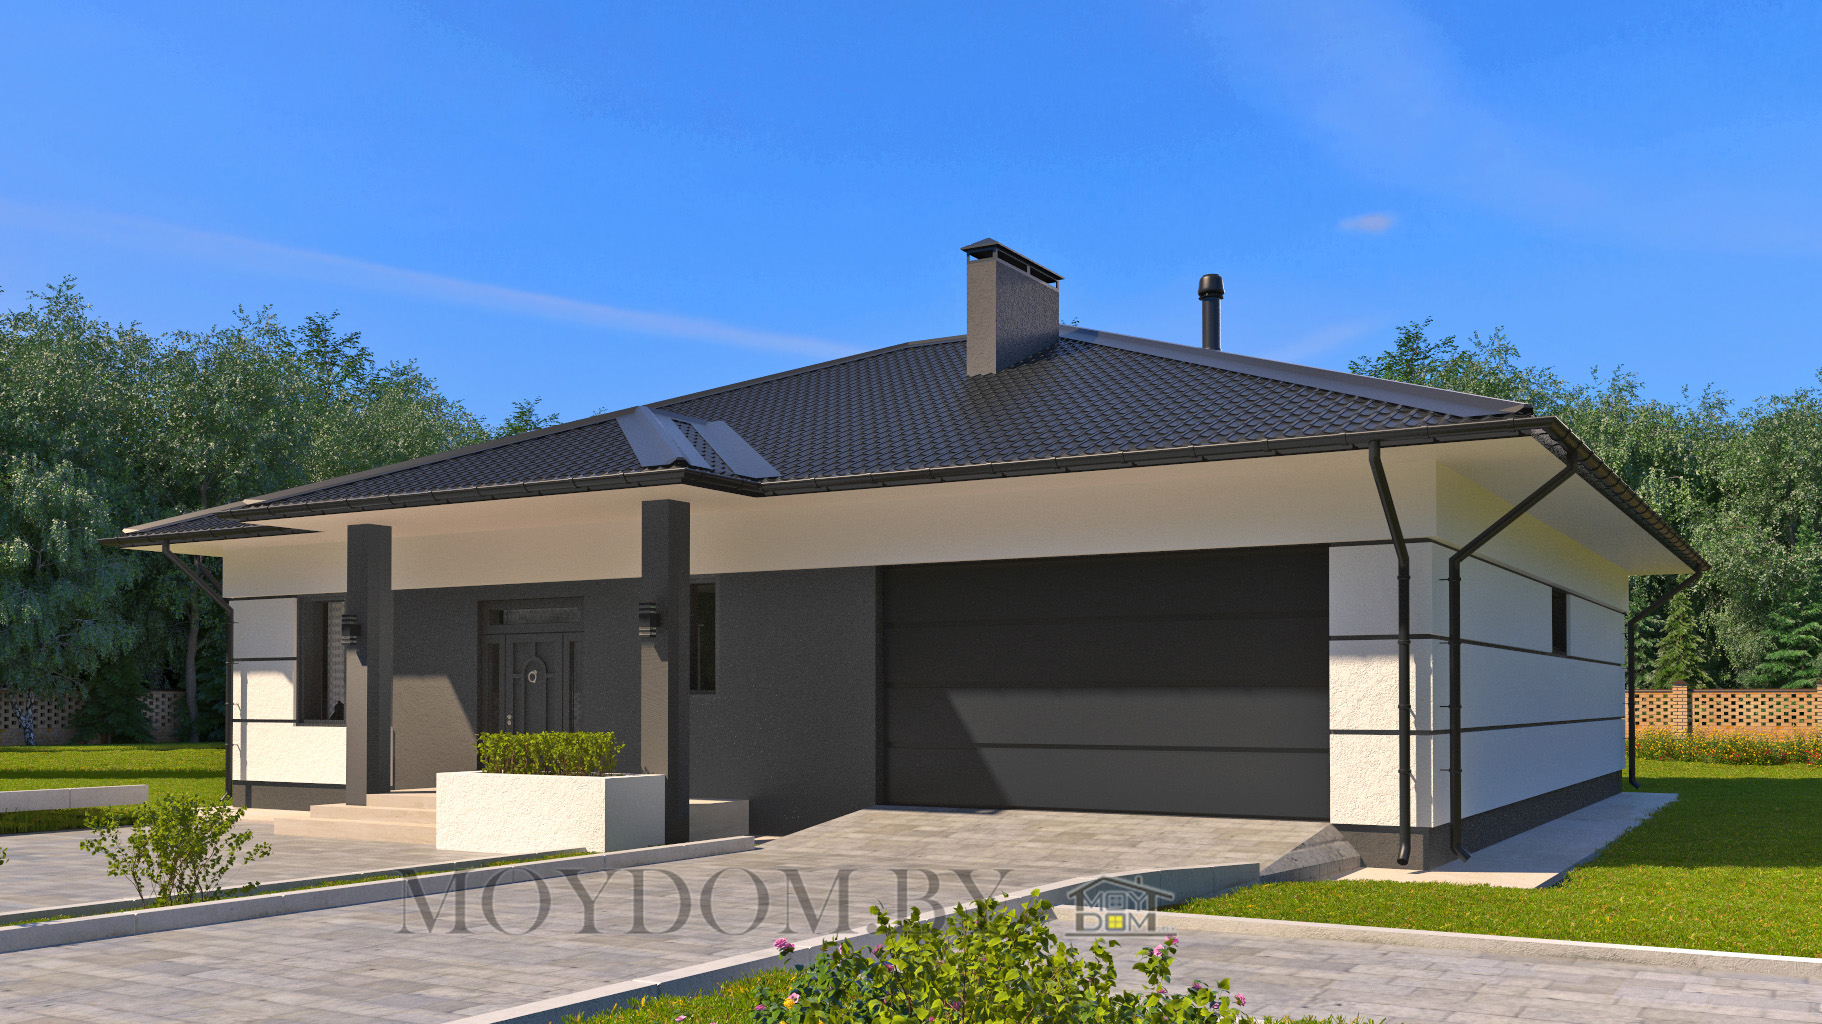 project of a one-story house with a garage for two cars